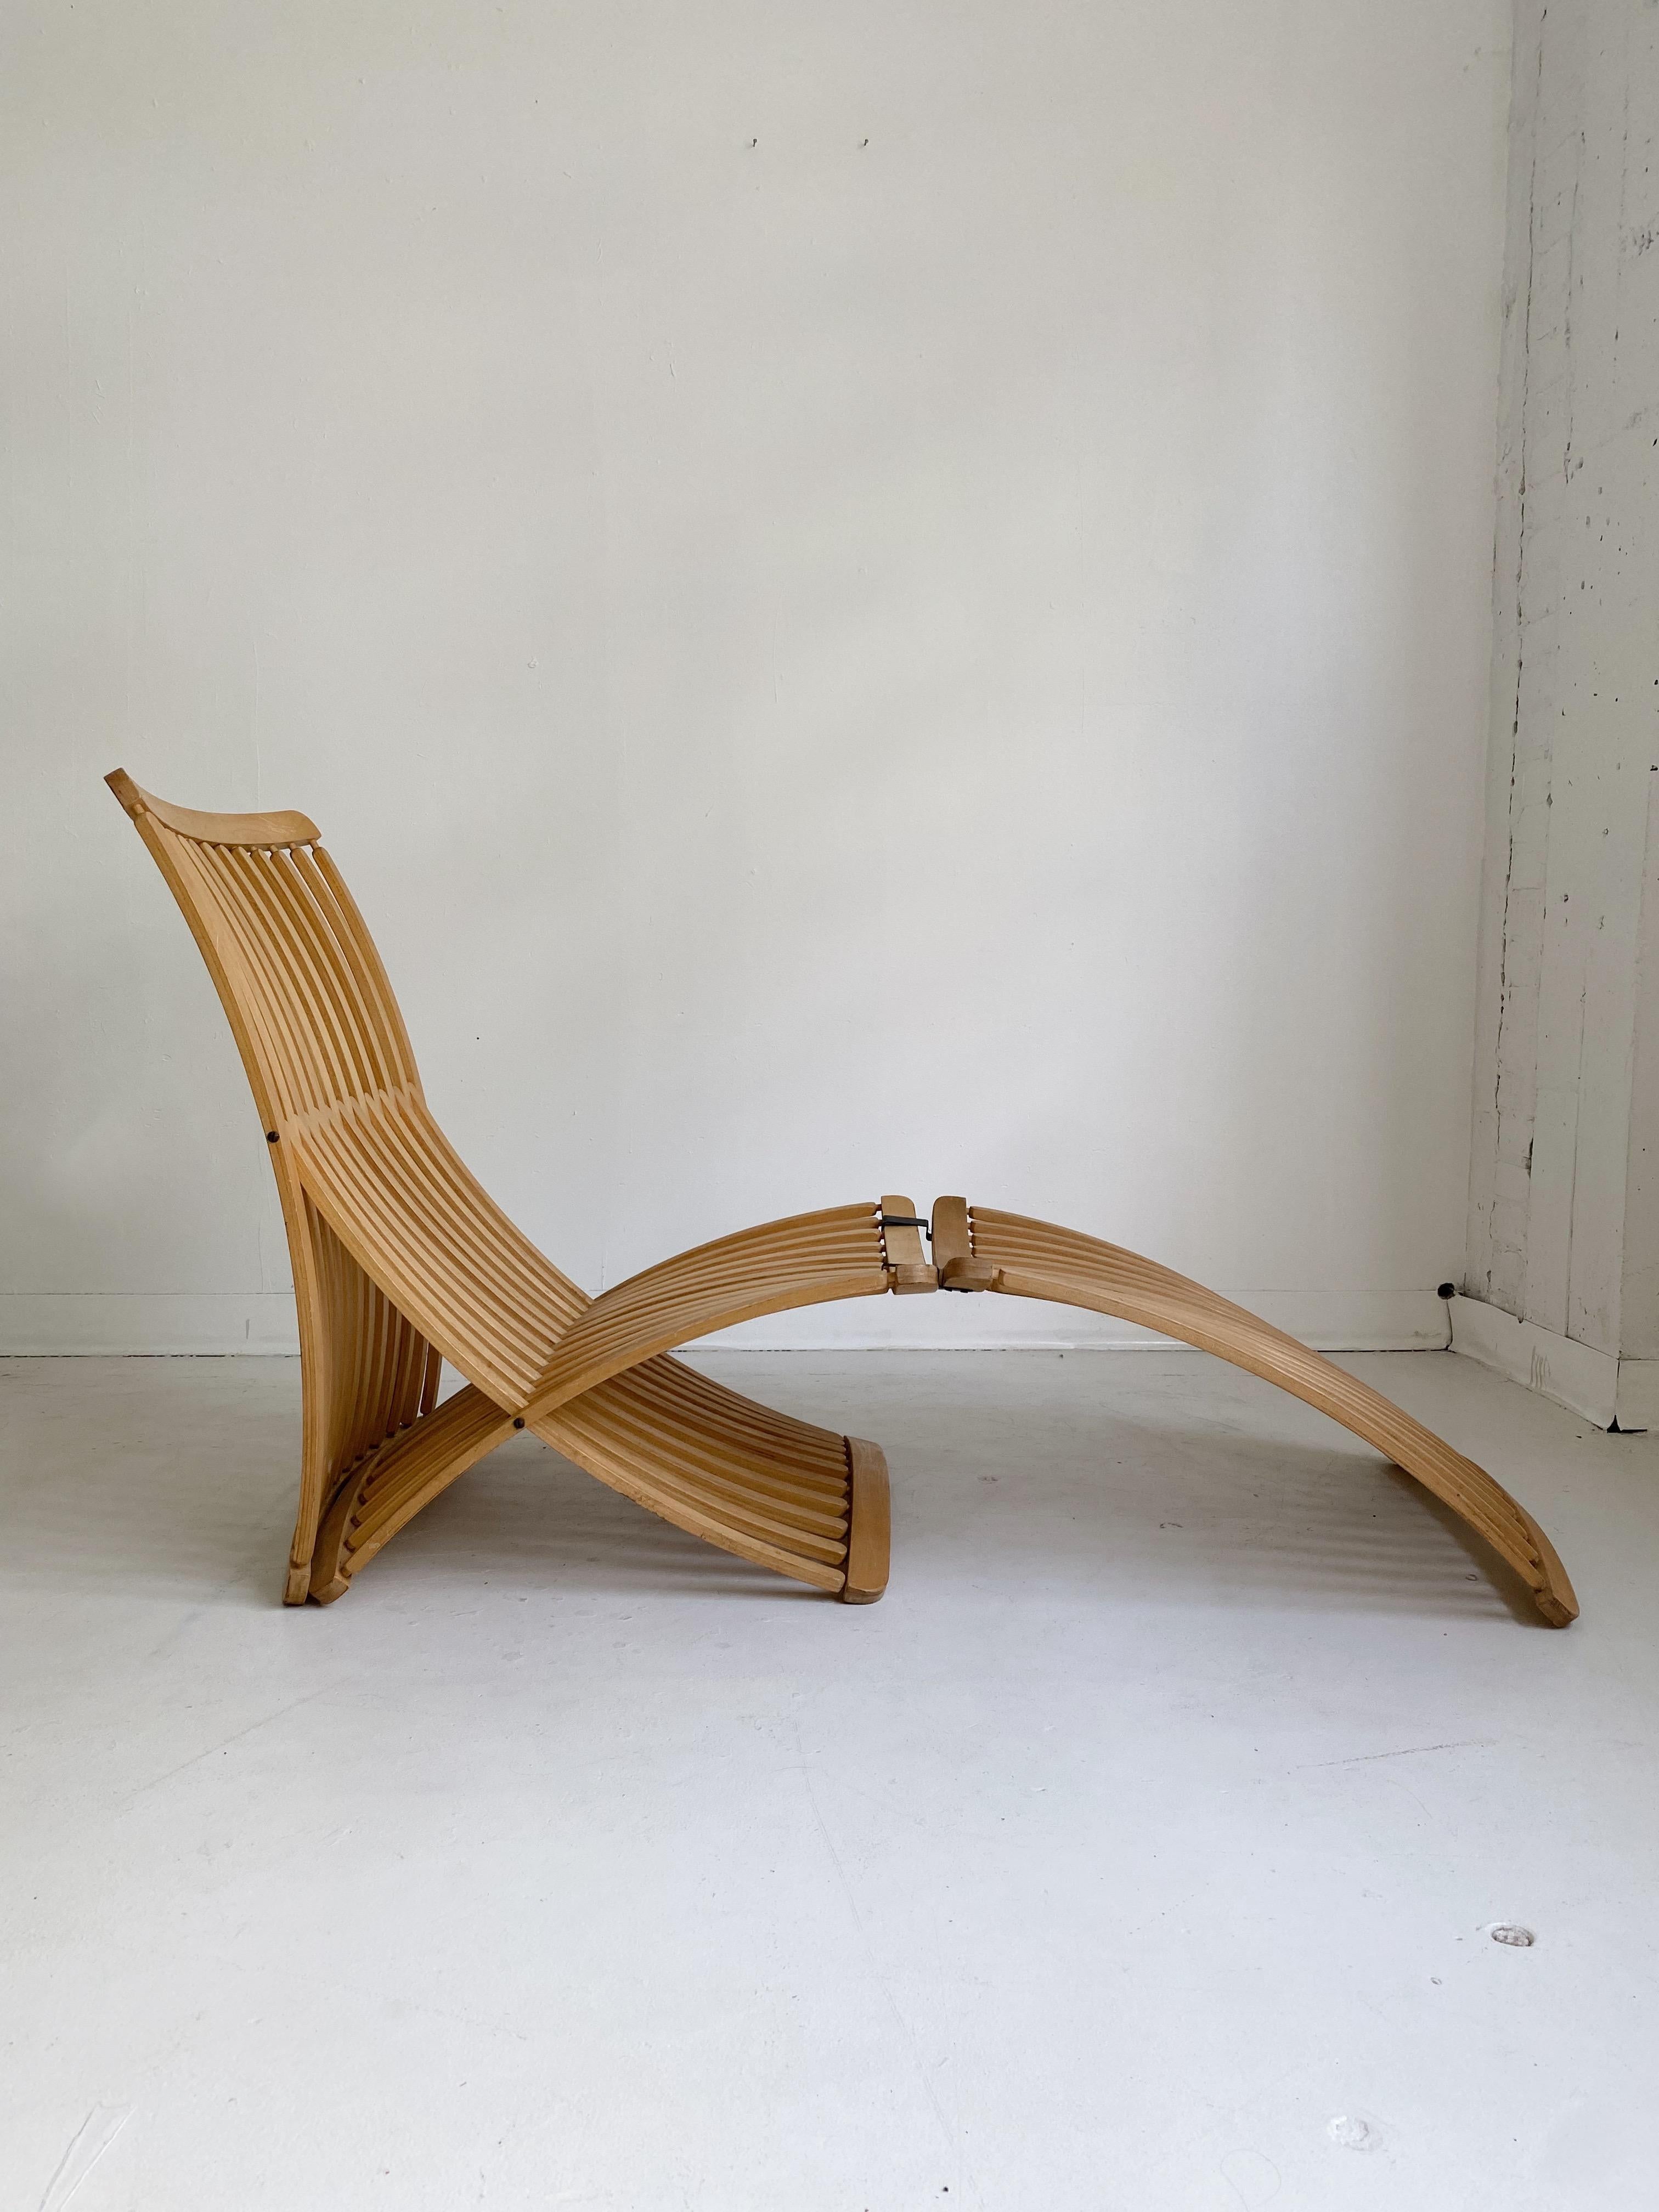 Vintage steamer lounge chair by Thomas Lamb for Ambient Systems, 70's

Made of nine-ply Canadian maple, has a detachable extending foot. Folds flat.

In 1979 it became the first Canadian object to enter the Museum of Modern Art’s permanent